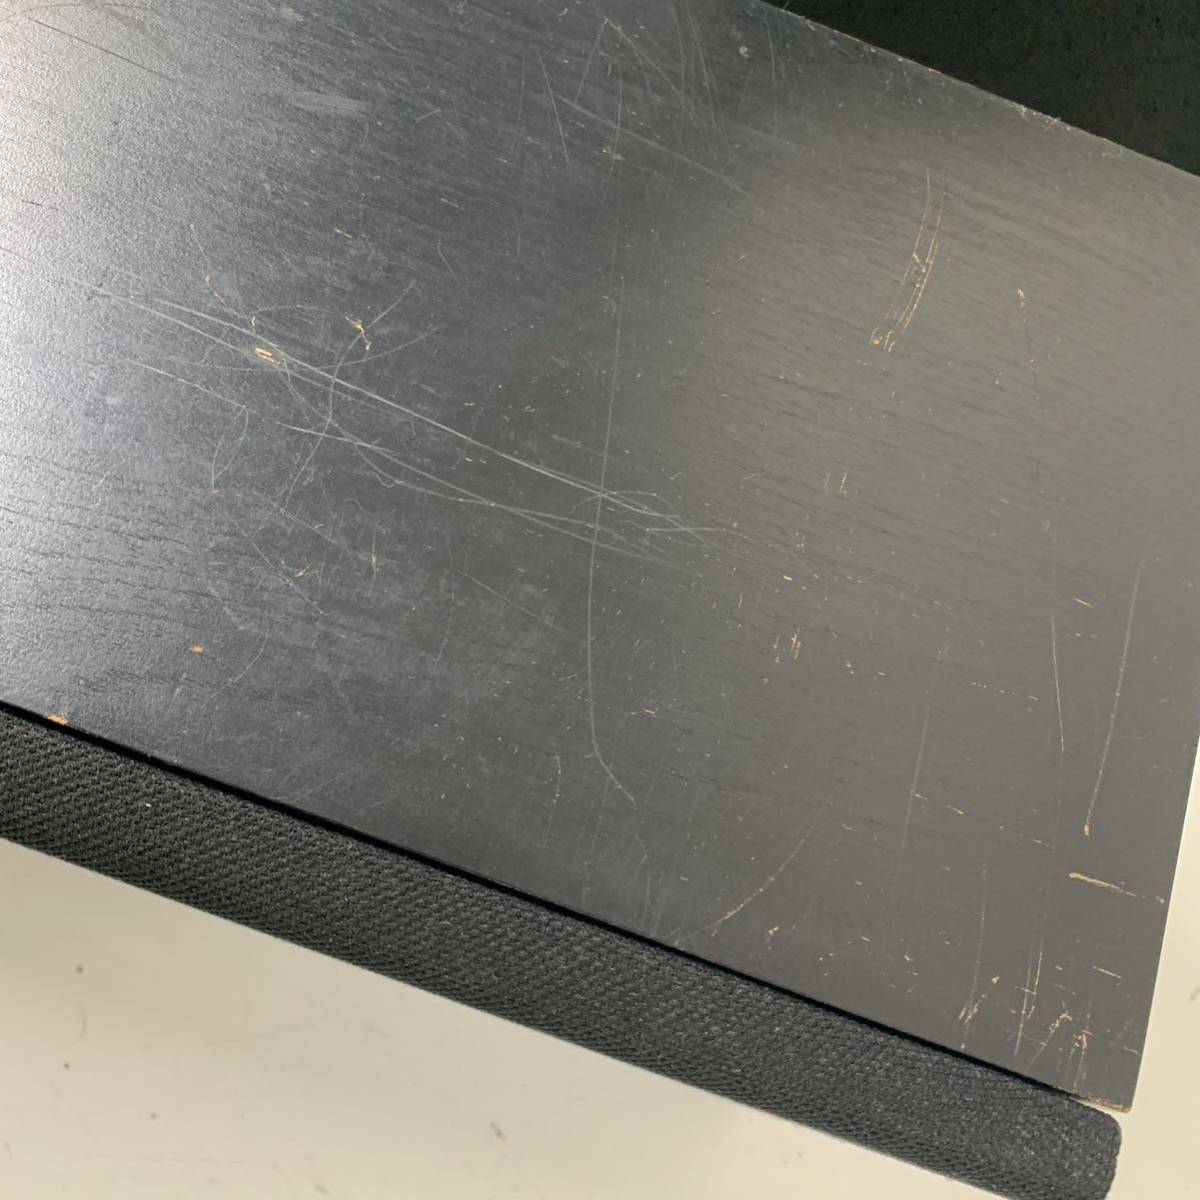 [Ha-2] YAMAHA NS-10M speaker pair Yamaha used sound out has confirmed all unit sound out OK scratch . dirt etc. damage great number use impression a little over .1188-72